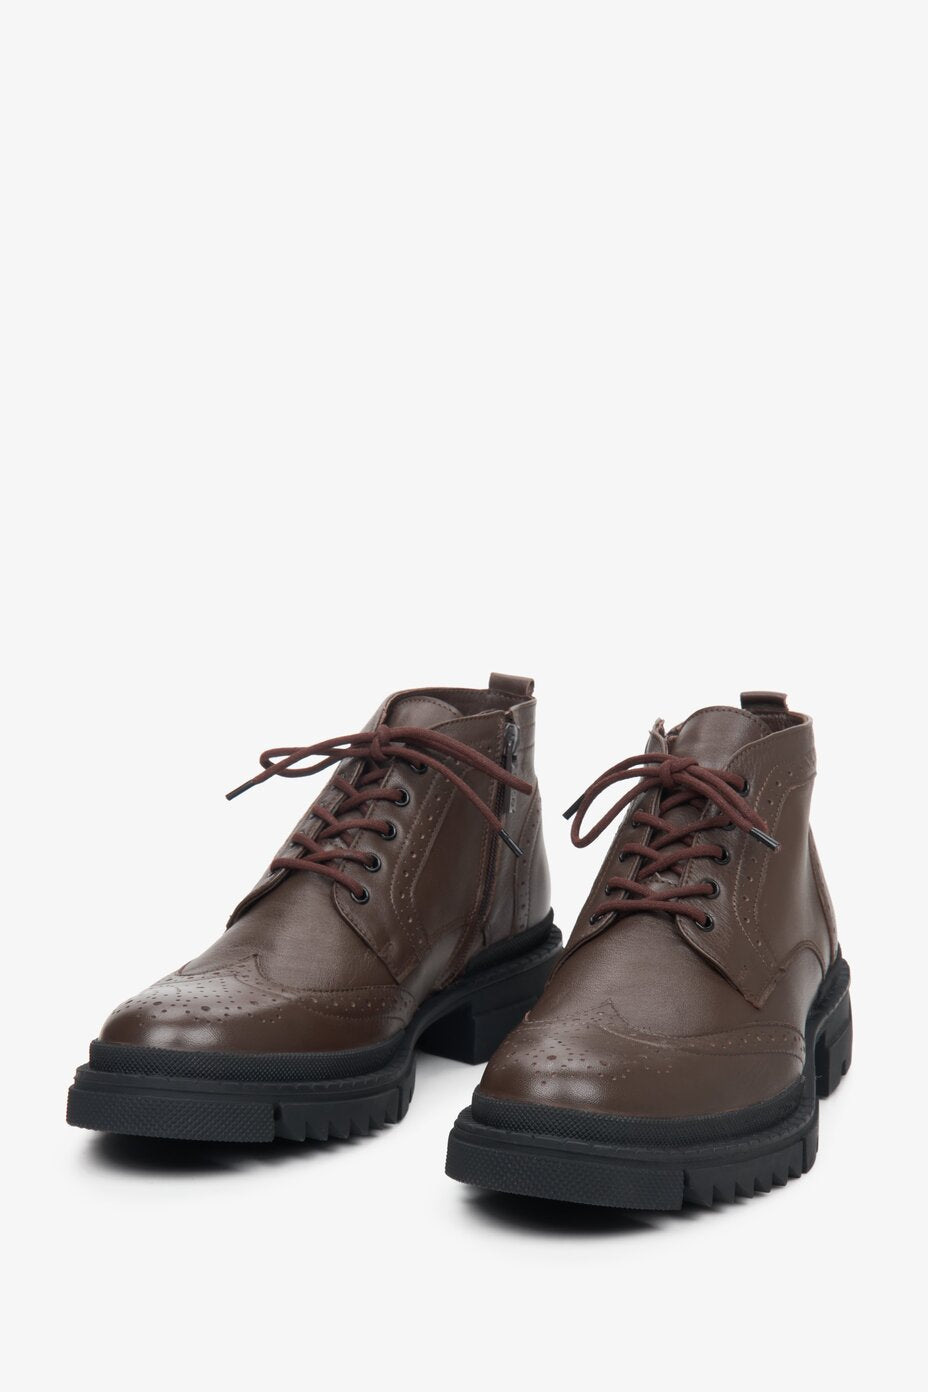 Tall Estro men's boots made of genuine brown leather.